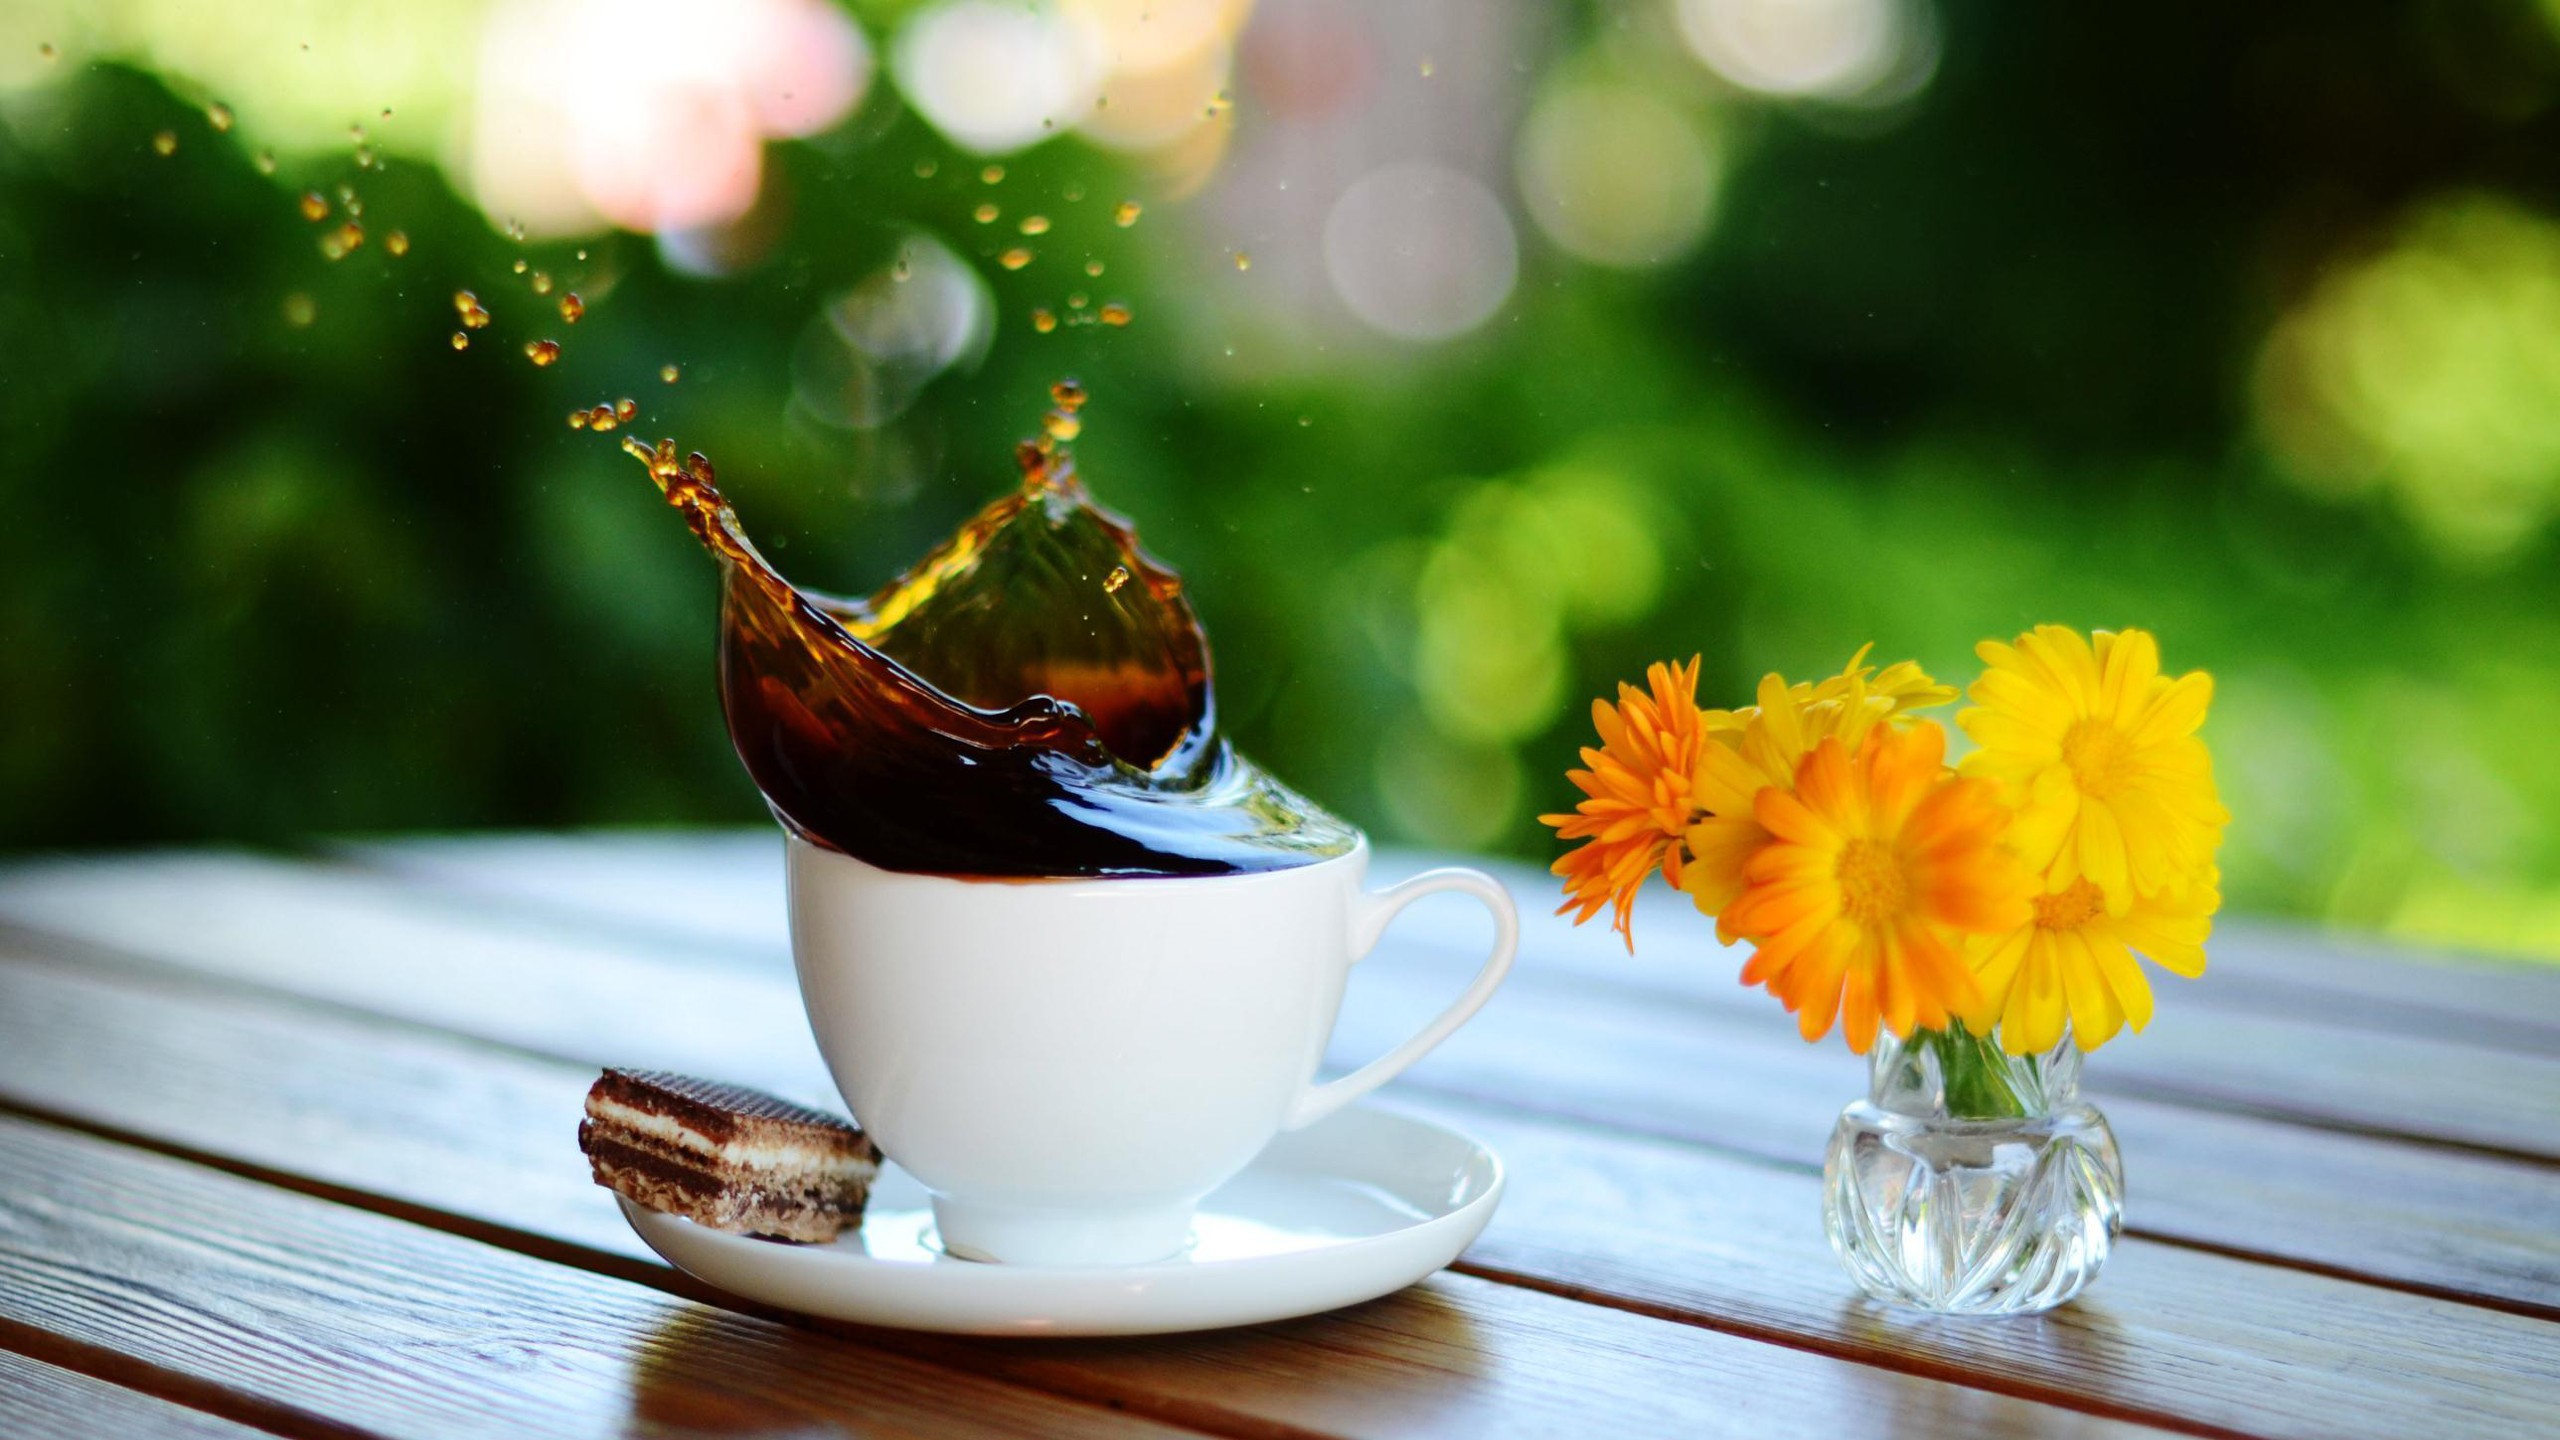 flowers, Coffee, Cookies, Bokeh, Coffee, Cups, Morning, Brownies, Time, Good, Morning, High, Speed, Speed, Coffee, Stain, Splashes Wallpaper